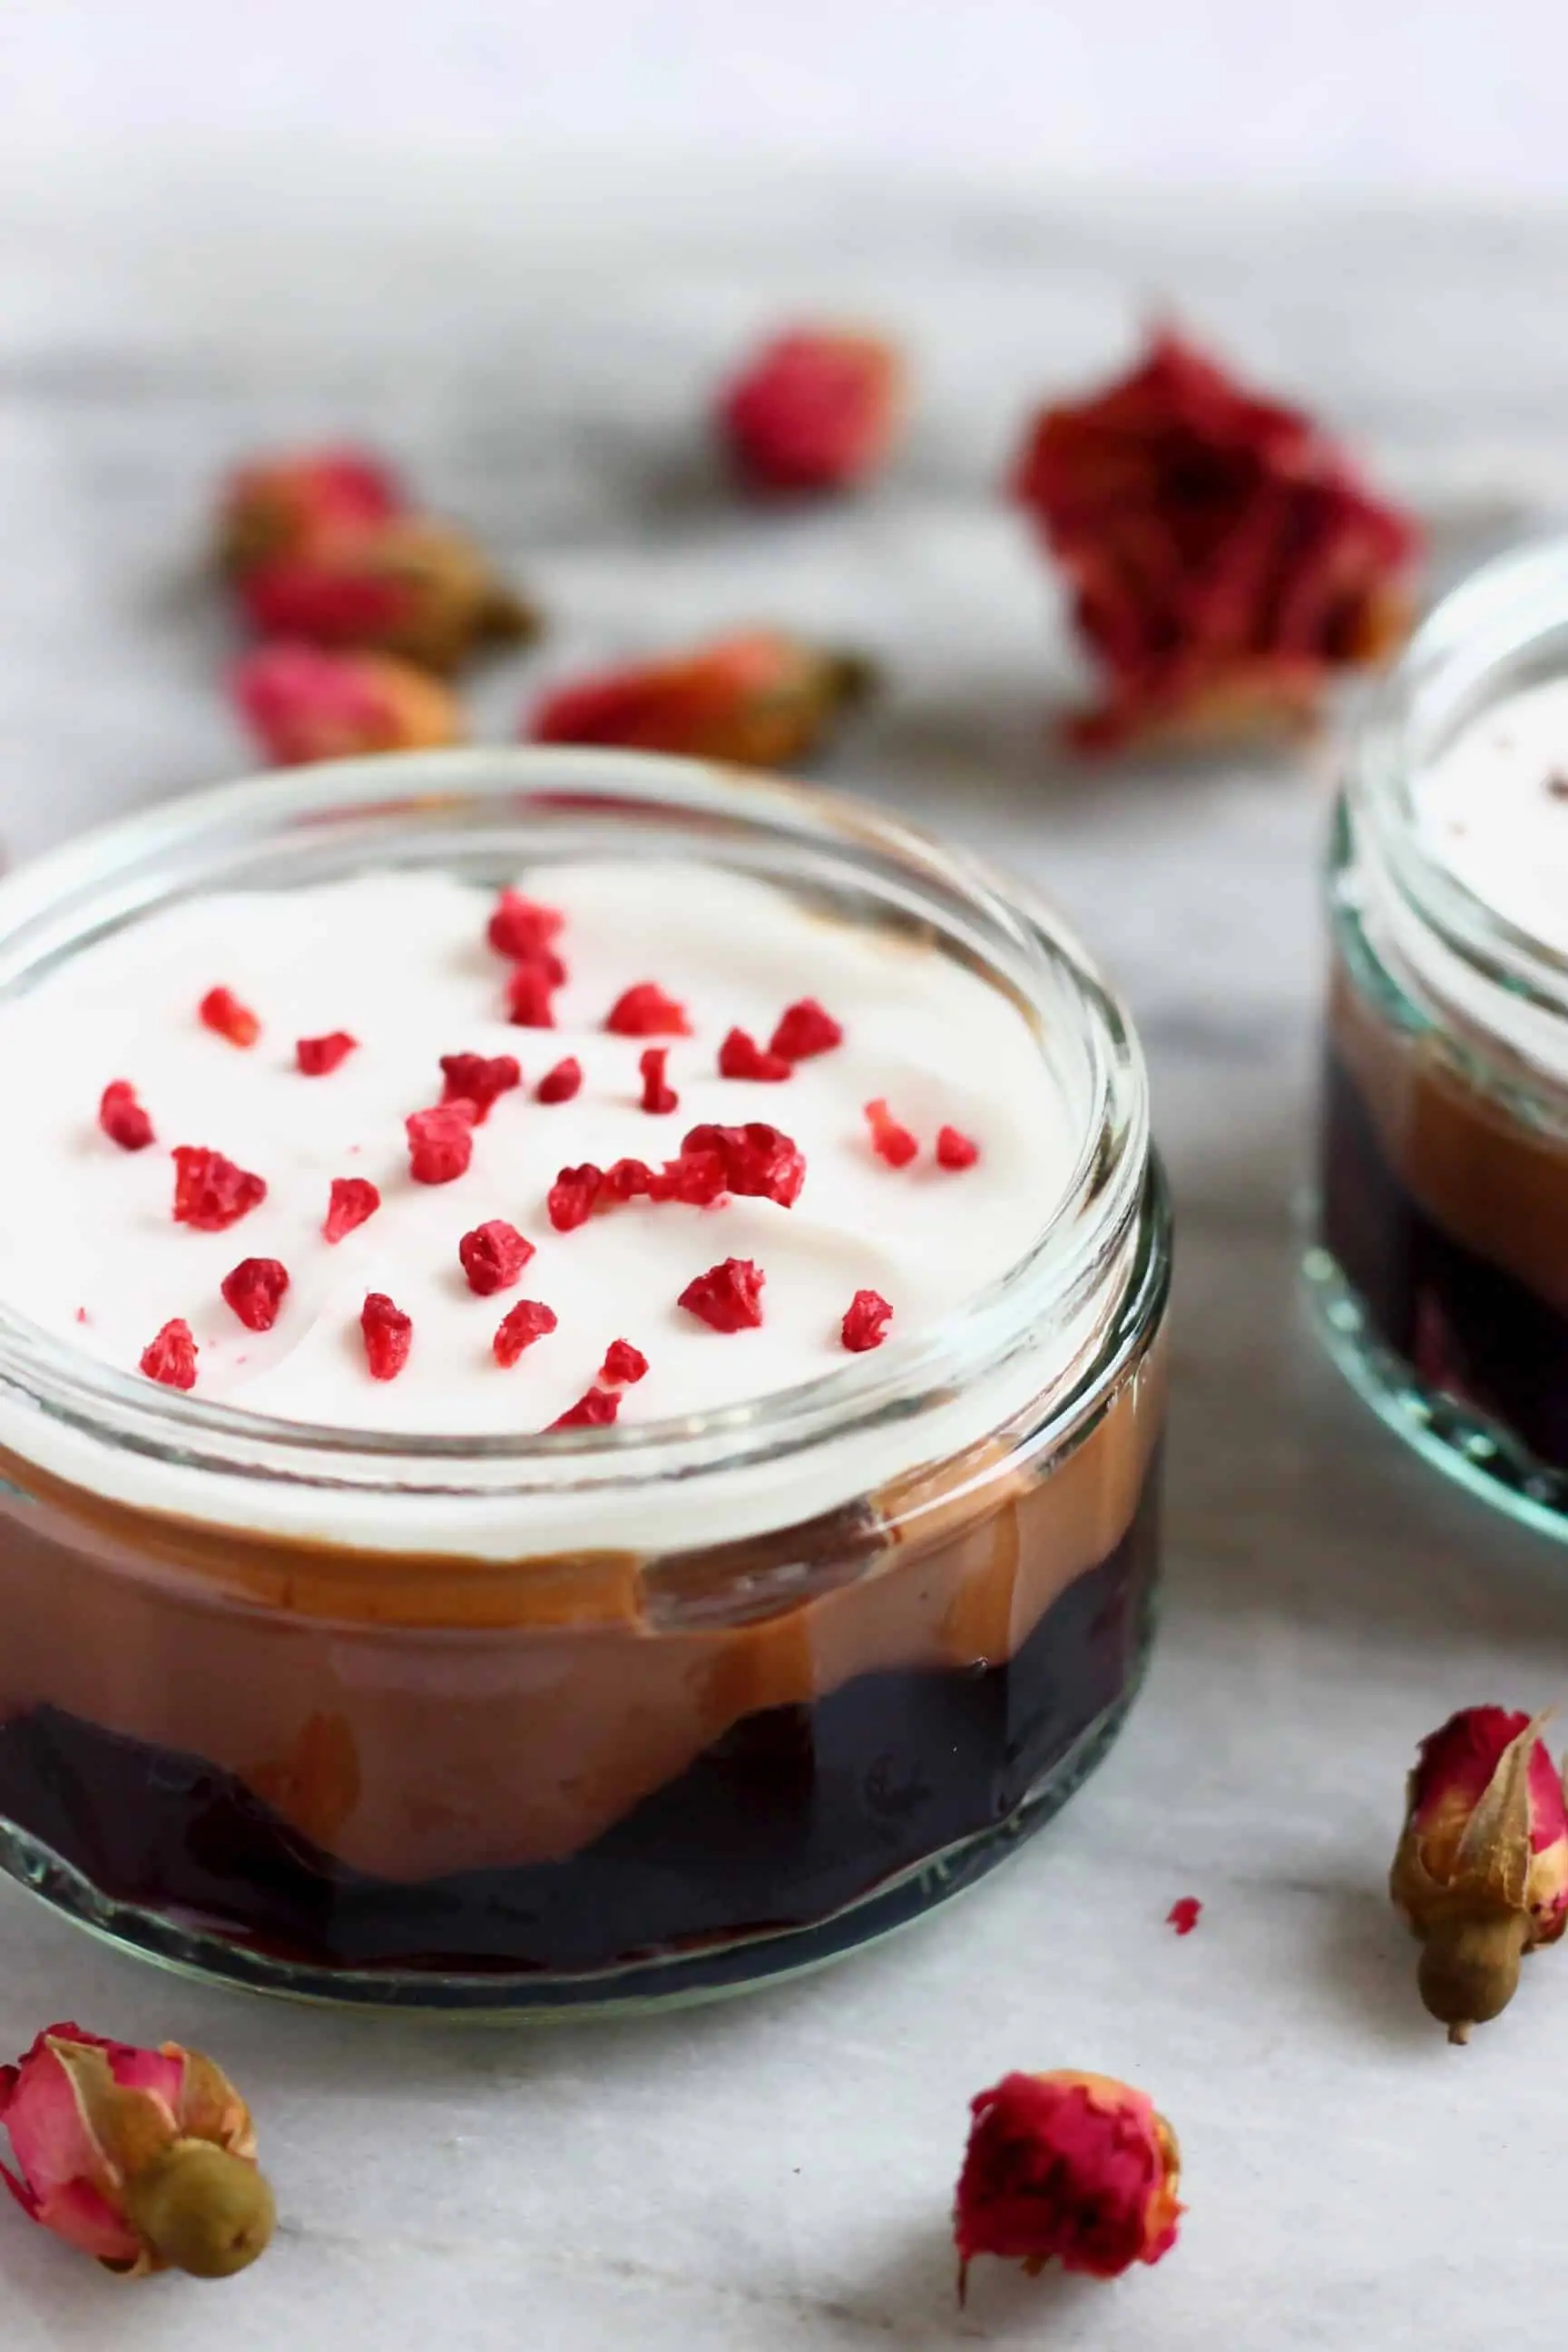 Chocolate cherry trifle in a glass ramekin made with cherries, chocolate custard and topped with white cream and freeze-dried raspberries 